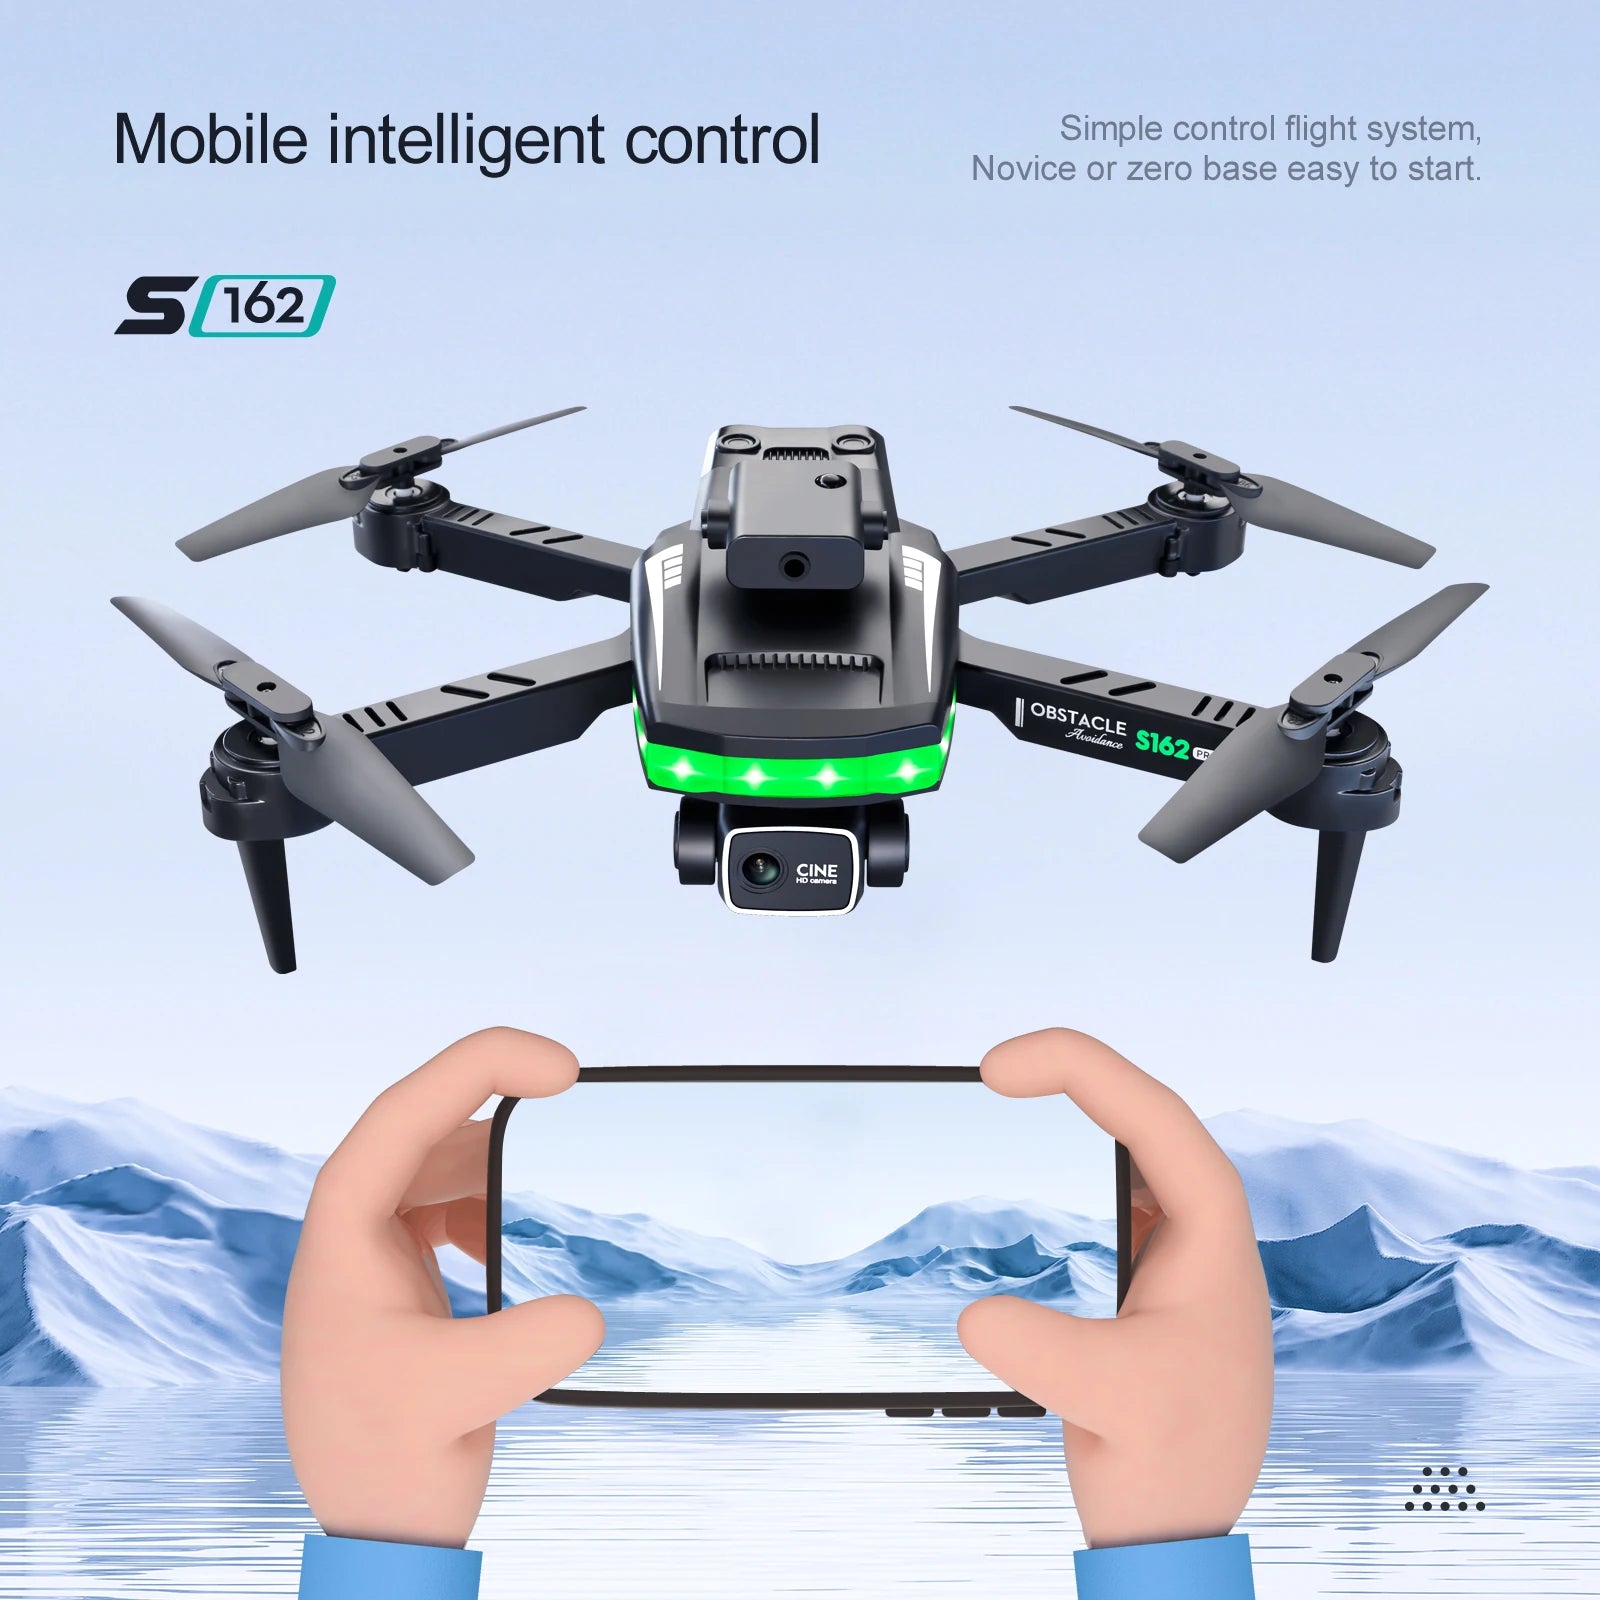 S162 Pro Drone, mobile intelligent control simple control flight system; novice or zero base easy to